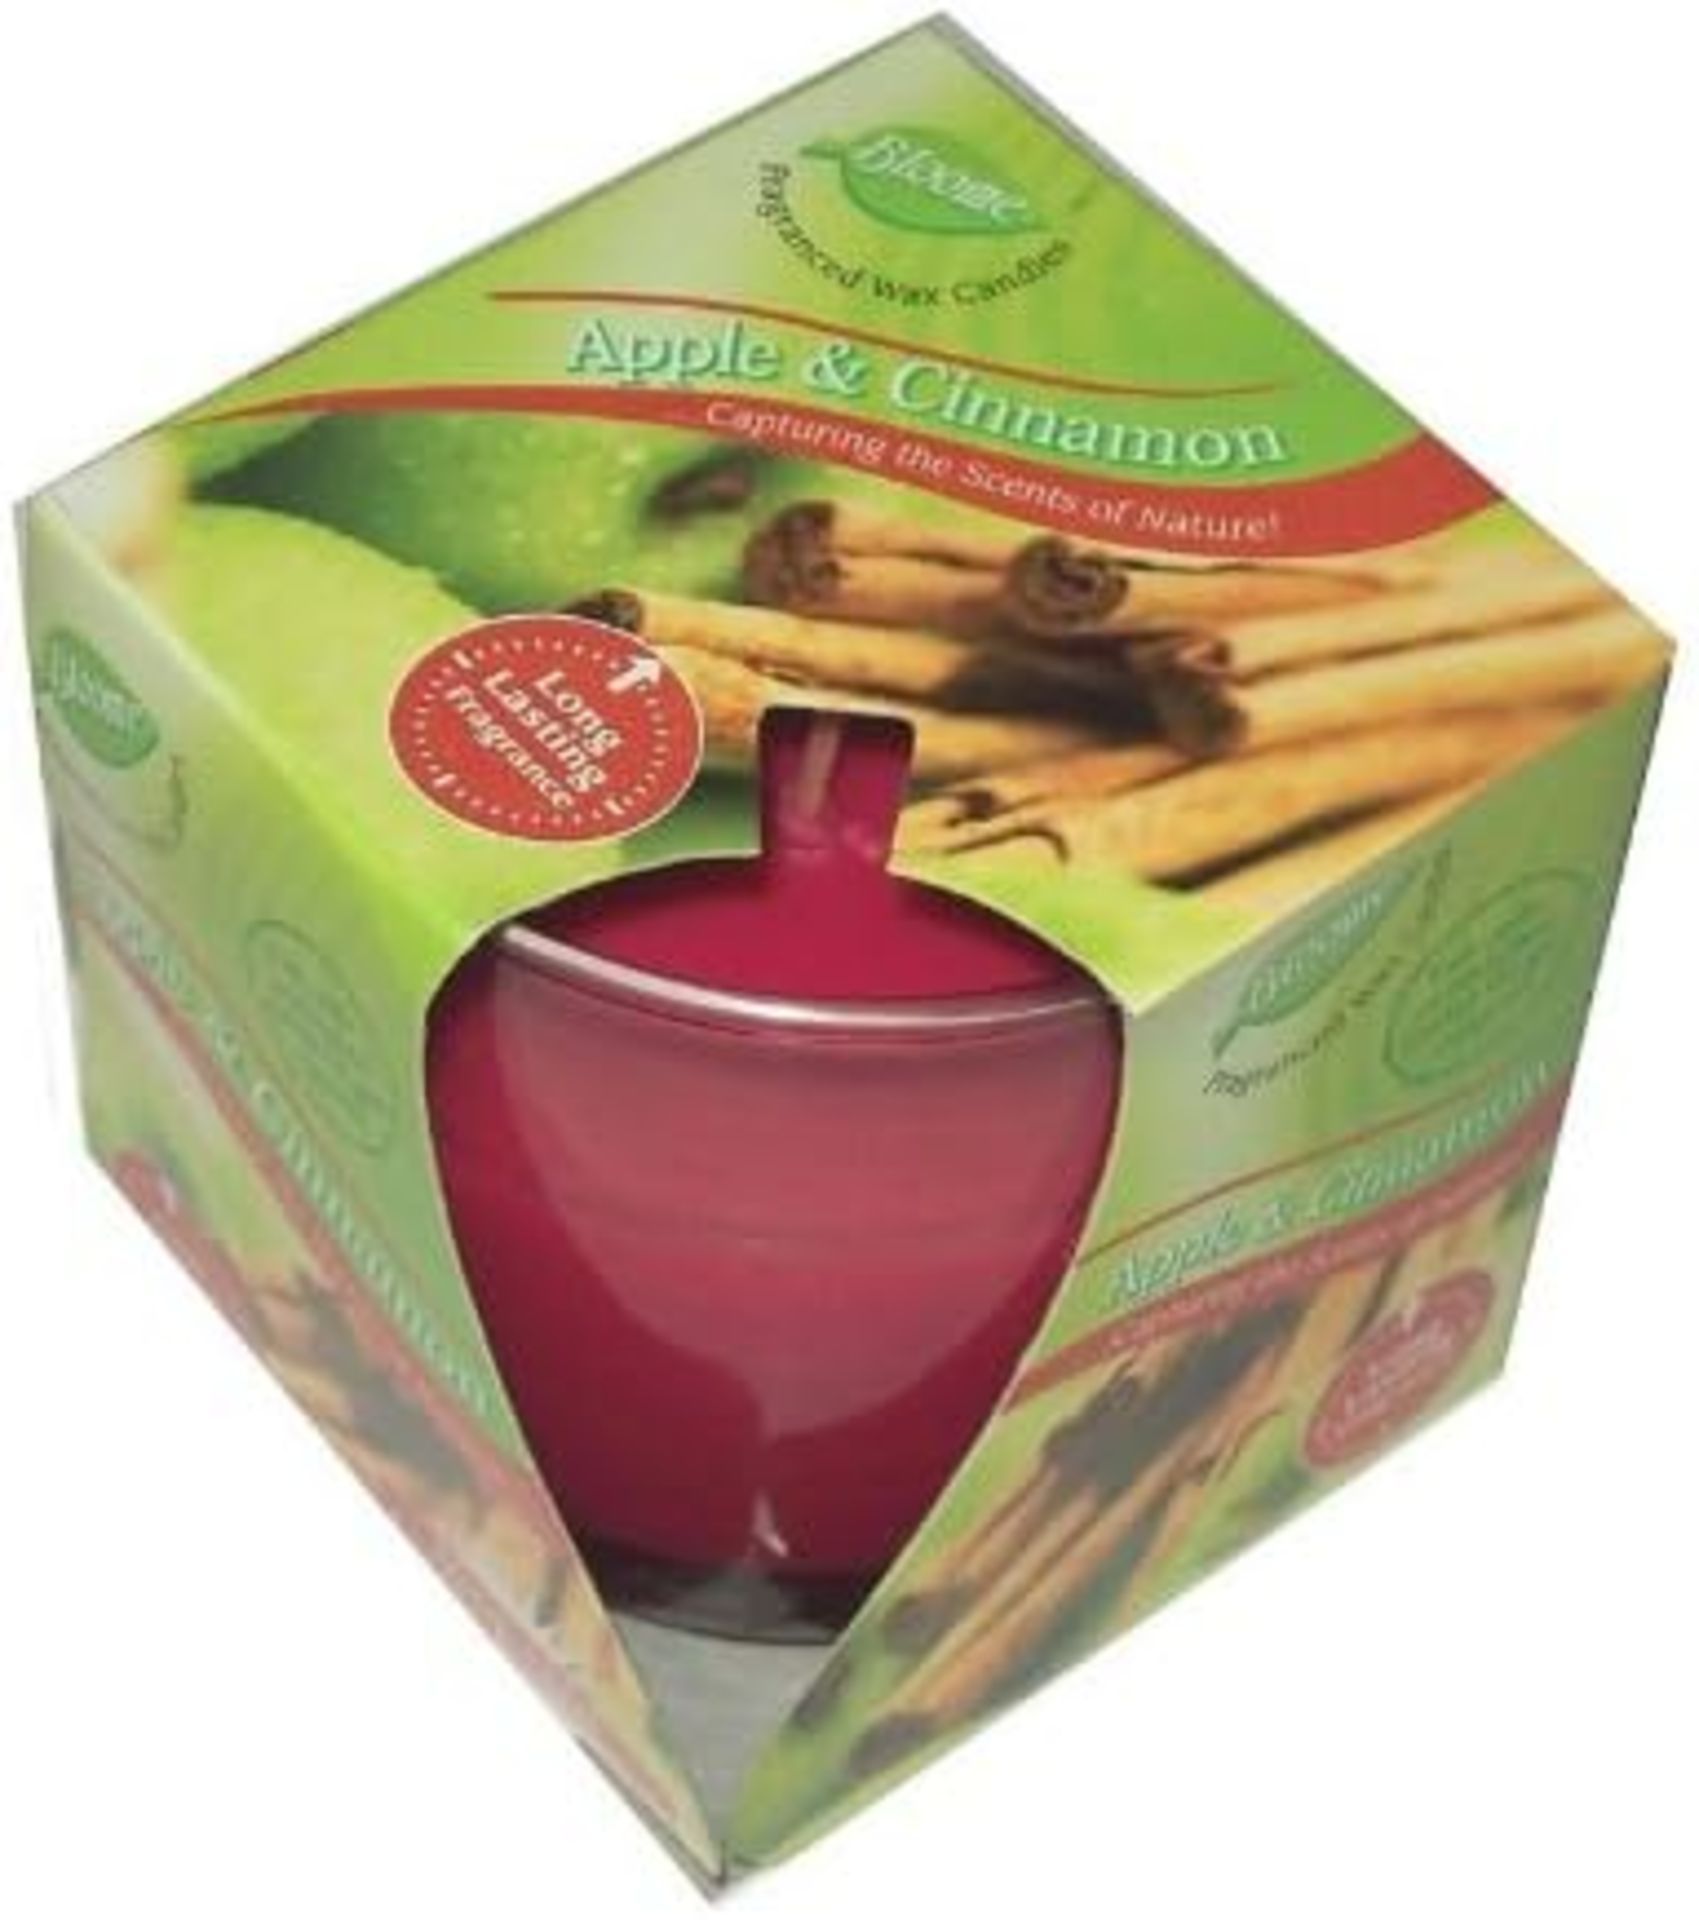 12 x Bloome Apple and Cinnamon Scented Candles RRP £8.99 ea